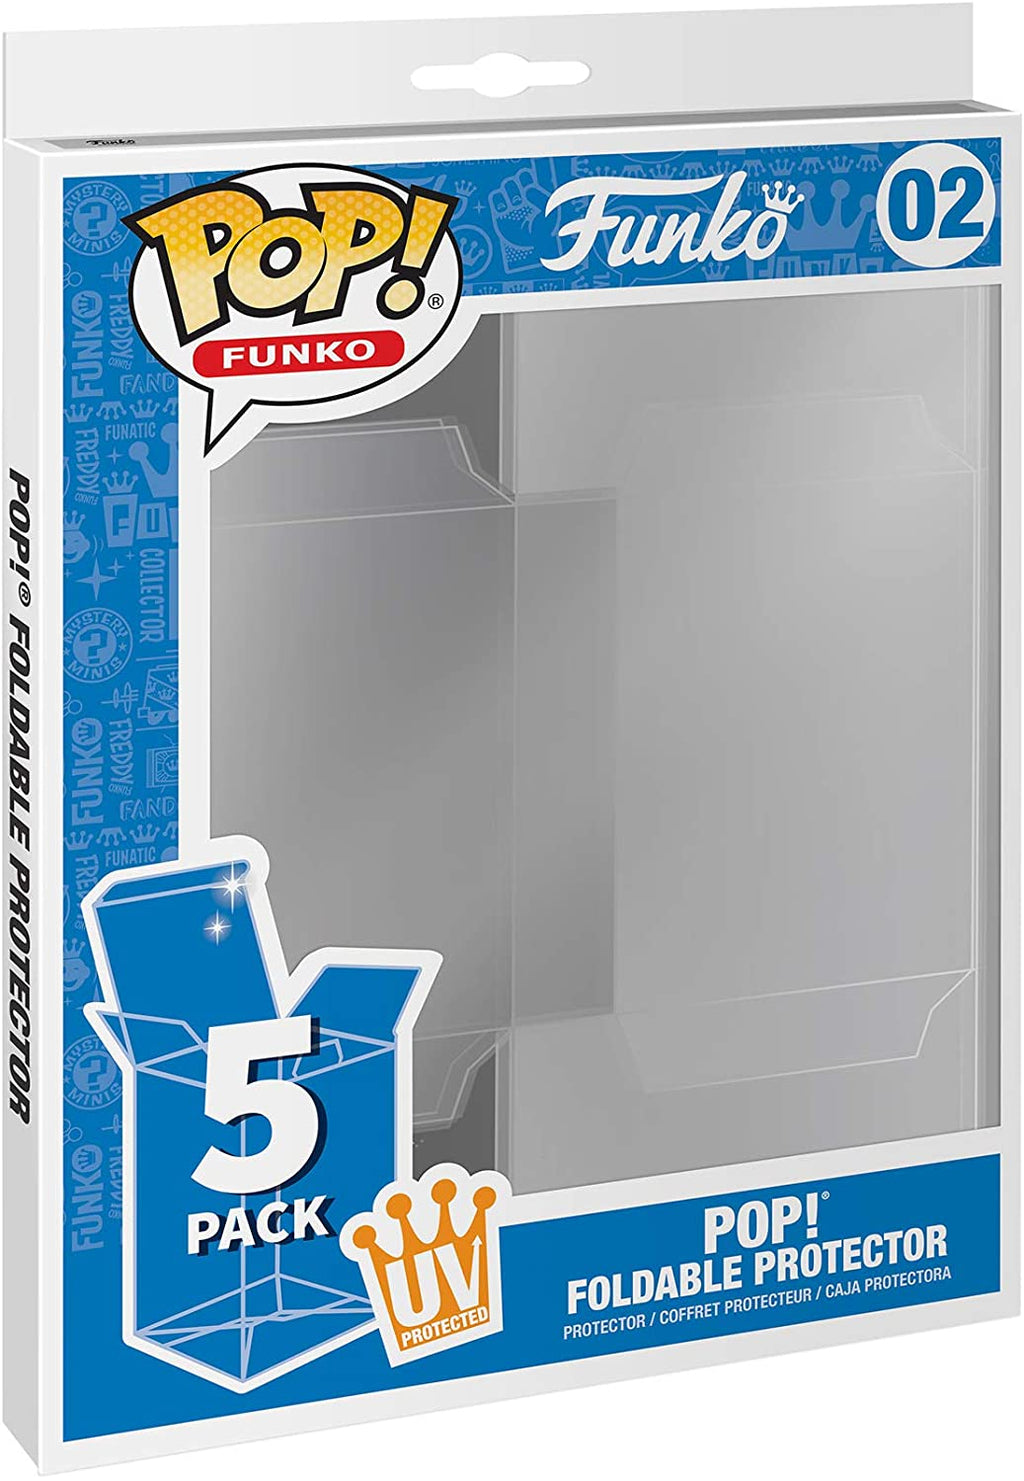 Funko Pop! 5 Pack Foldable Pop Protector